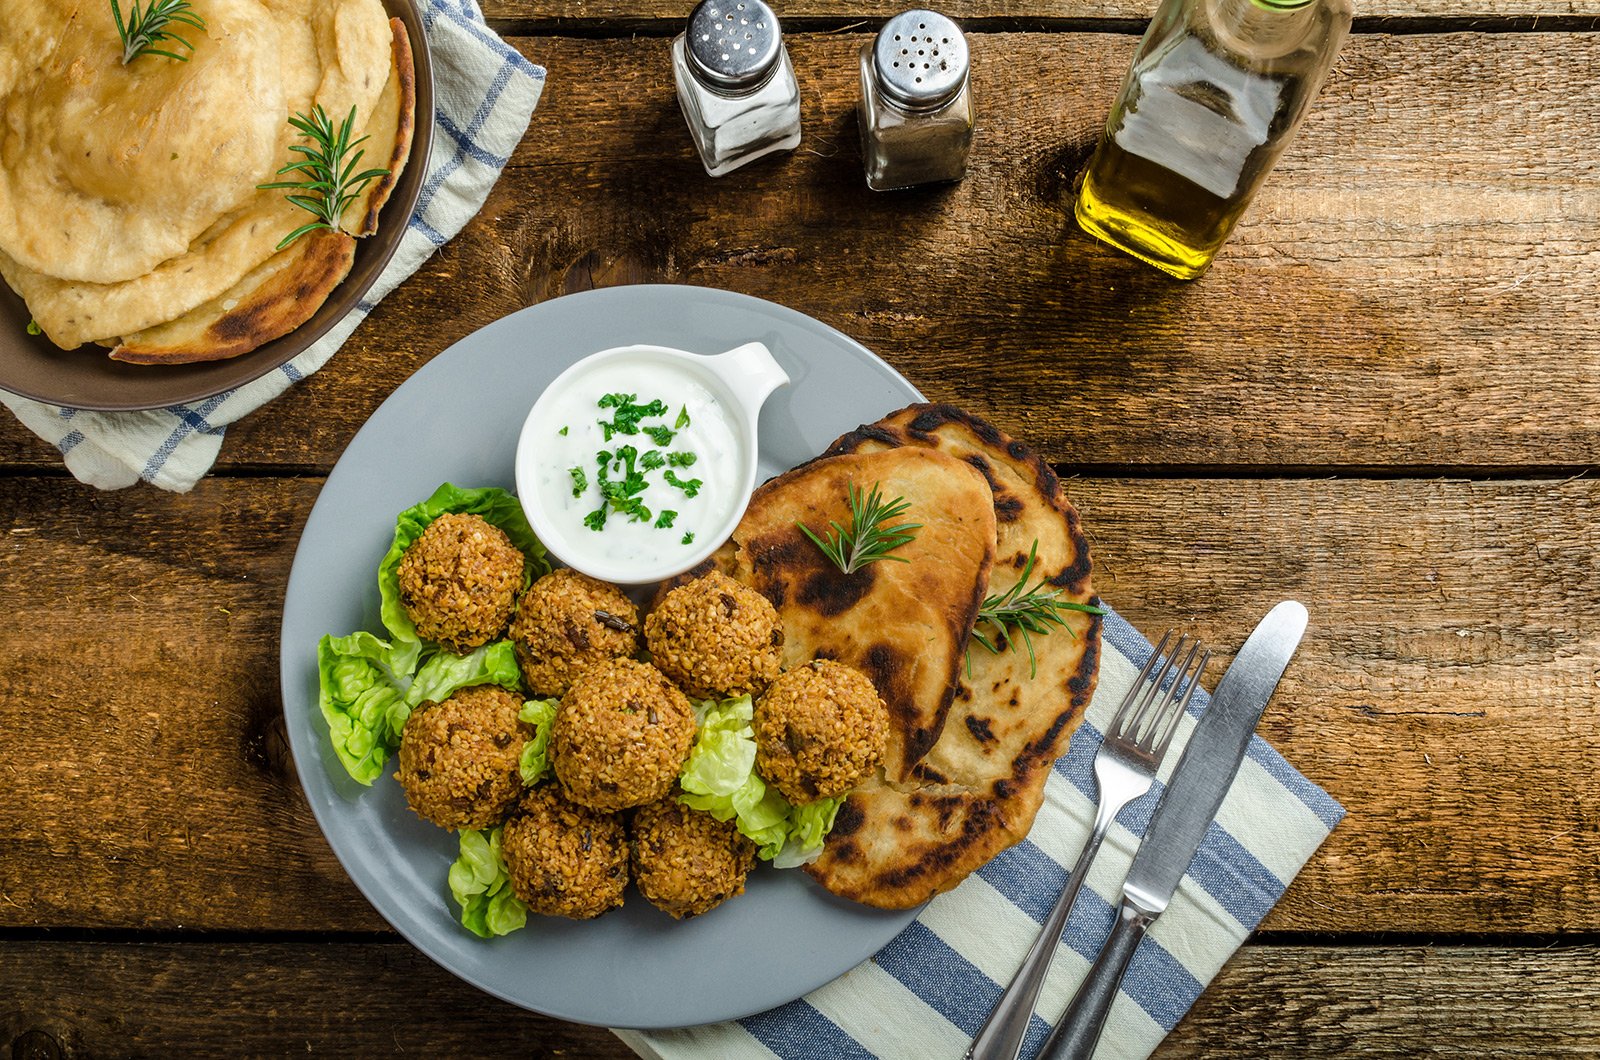 How to try falafel in Dubai